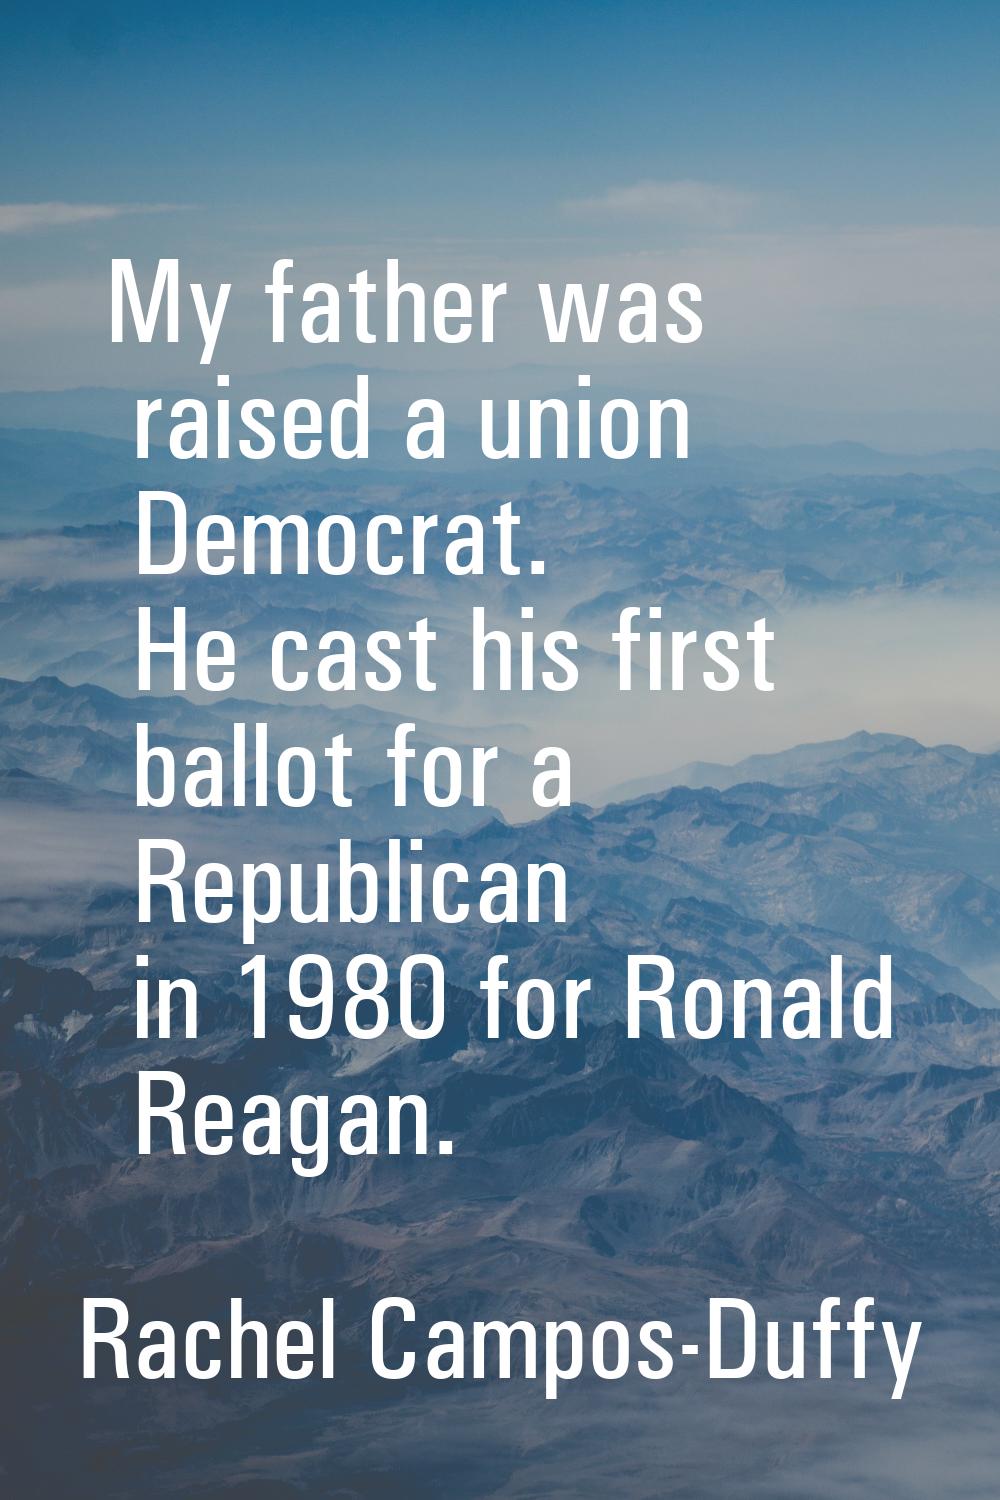 My father was raised a union Democrat. He cast his first ballot for a Republican in 1980 for Ronald